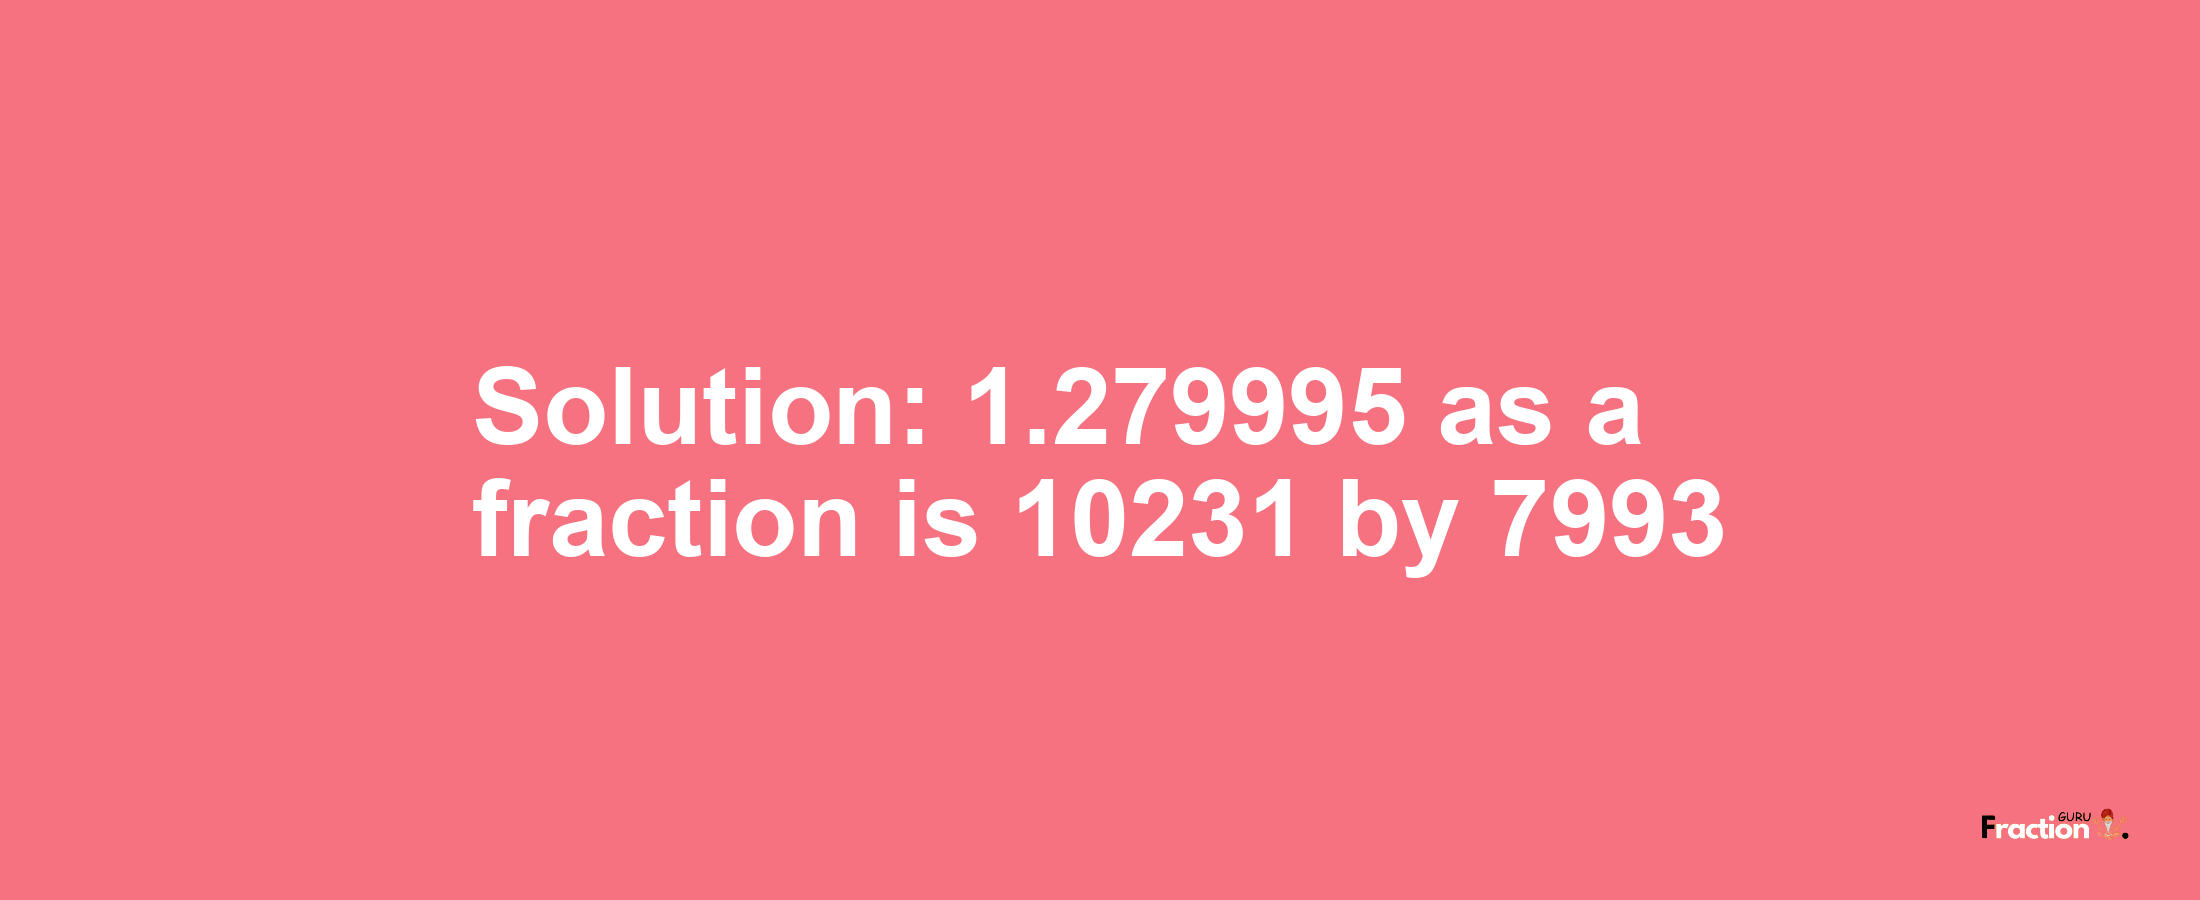 Solution:1.279995 as a fraction is 10231/7993